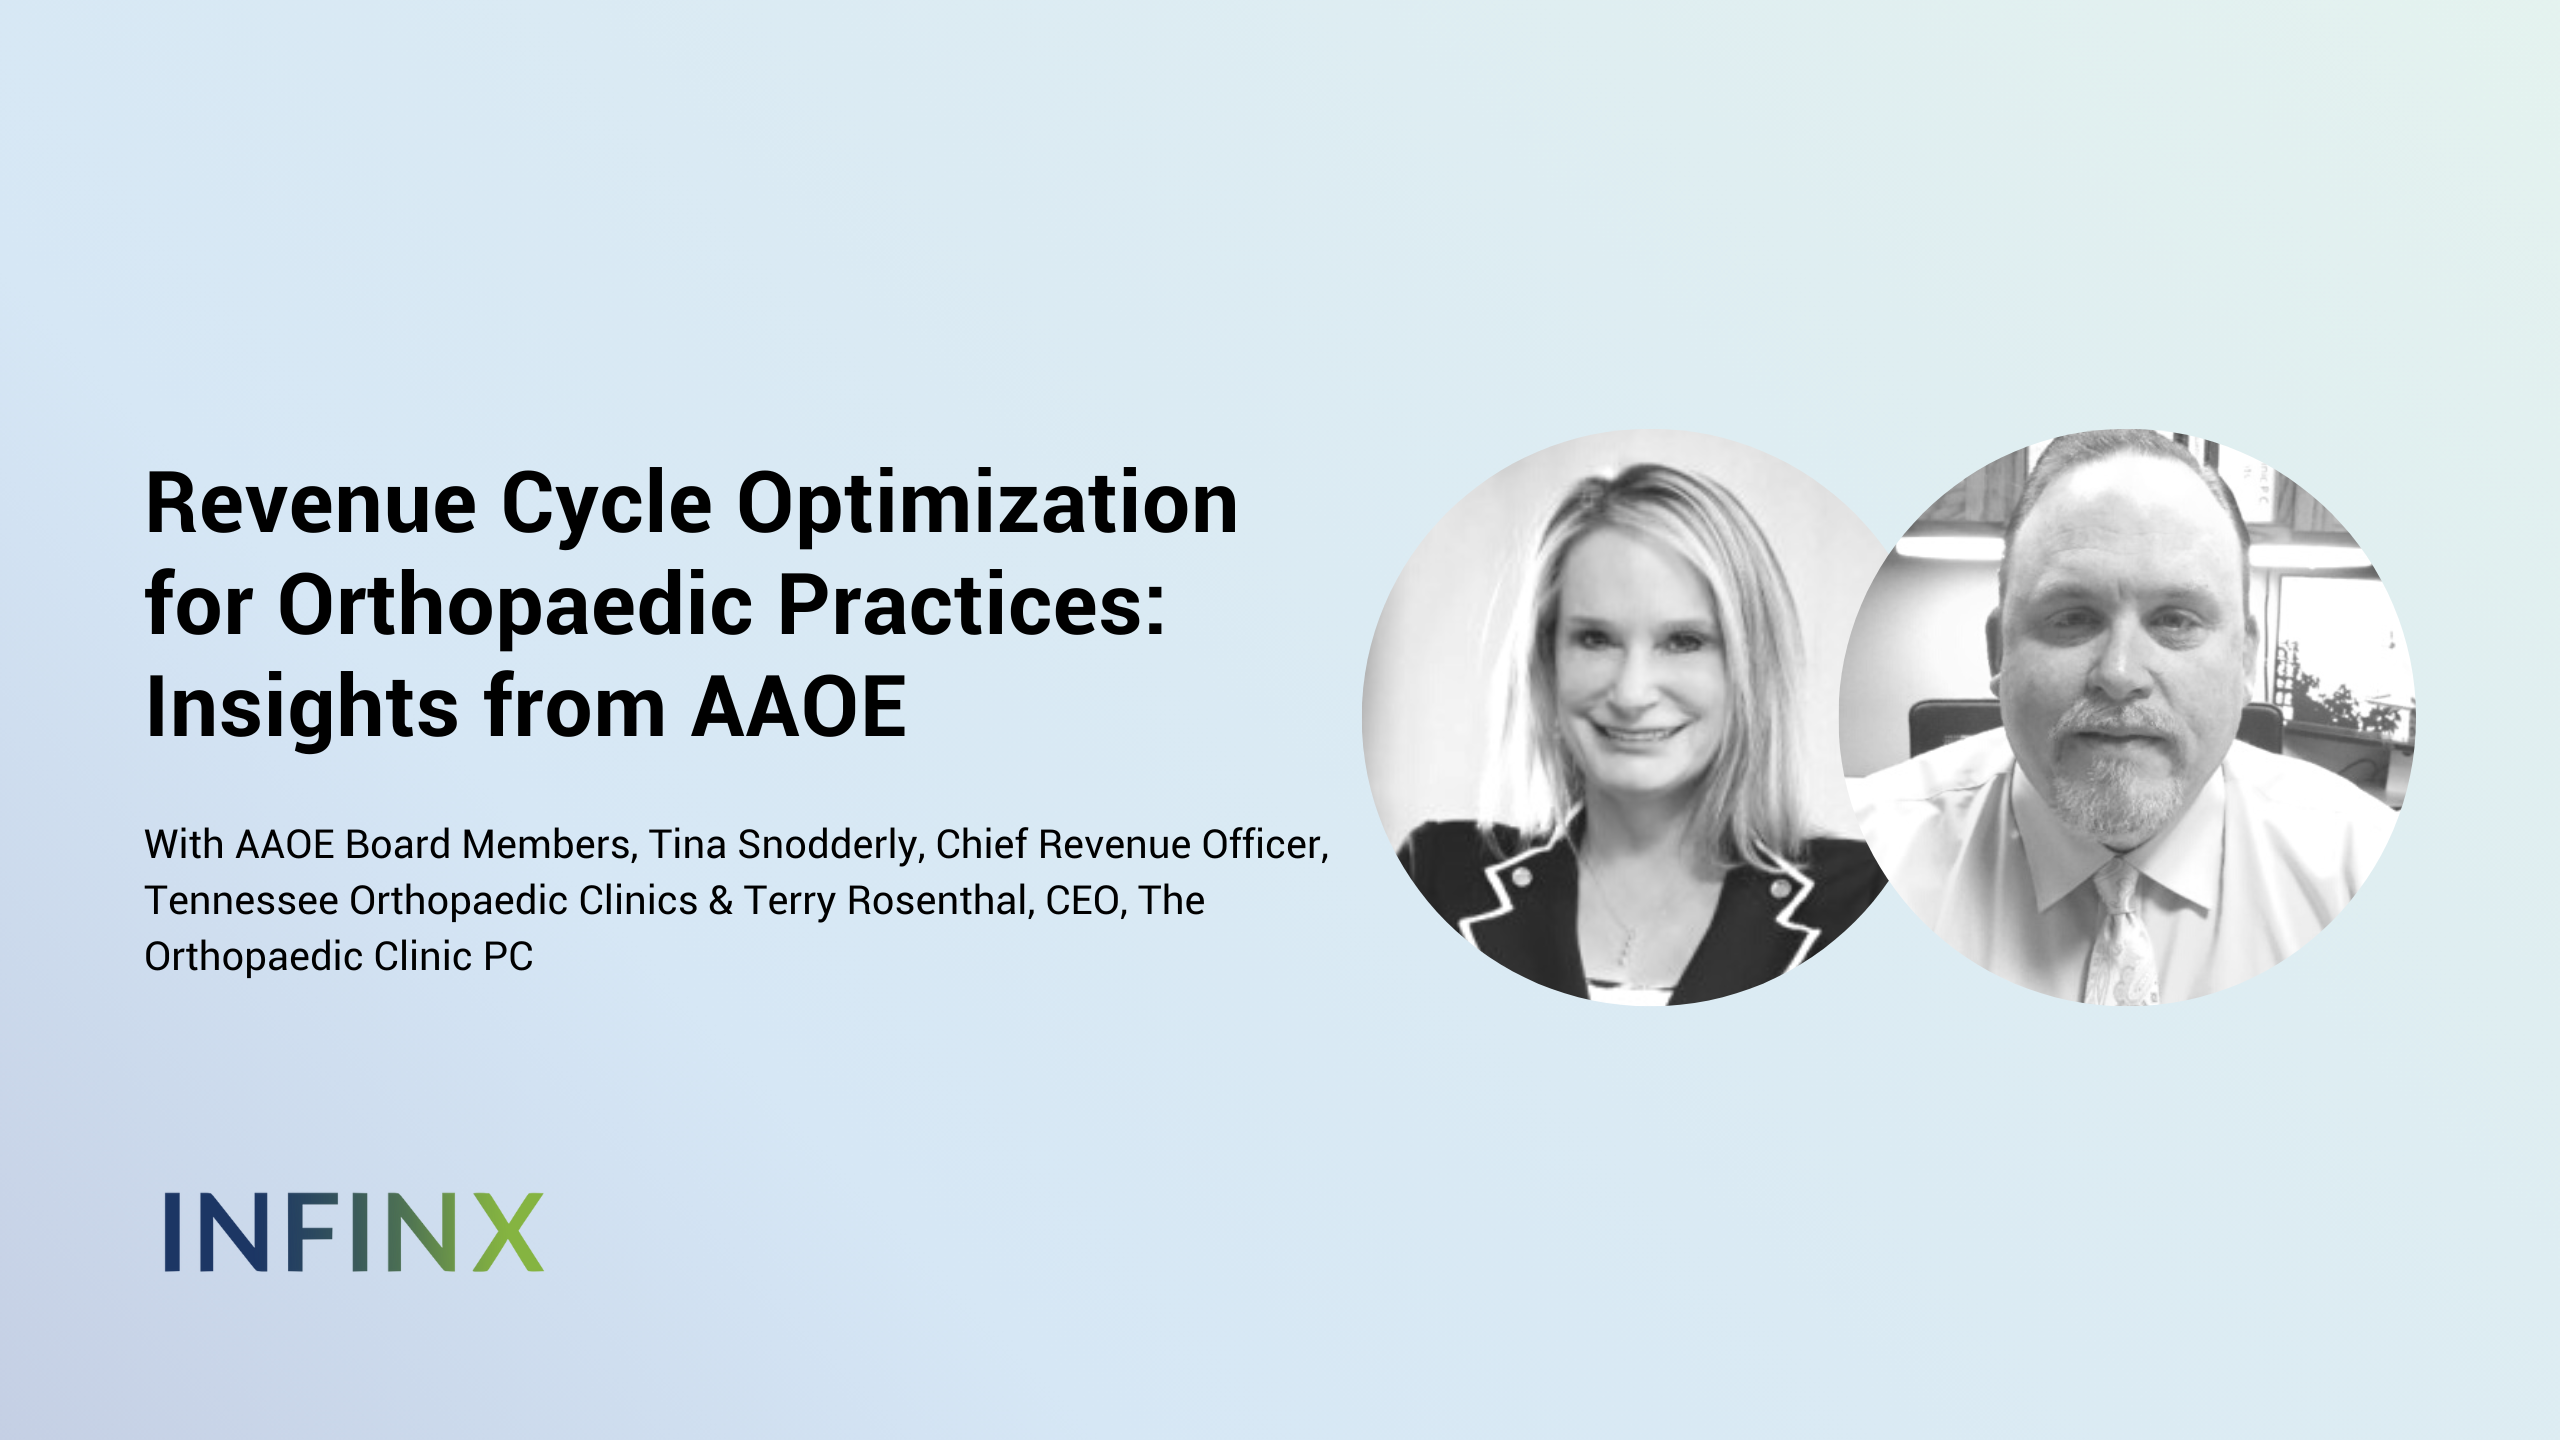 Revenue Cycle Optimization for Orthopaedic Practices Insights from AAOE With CRO, Tennessee Orthopaedic Clinics, Tina Snodderly & CEO, The Orthopaedic Clinic PC, Terry Rosenthal Infinx Office Hours Revenue Cycle Optimized